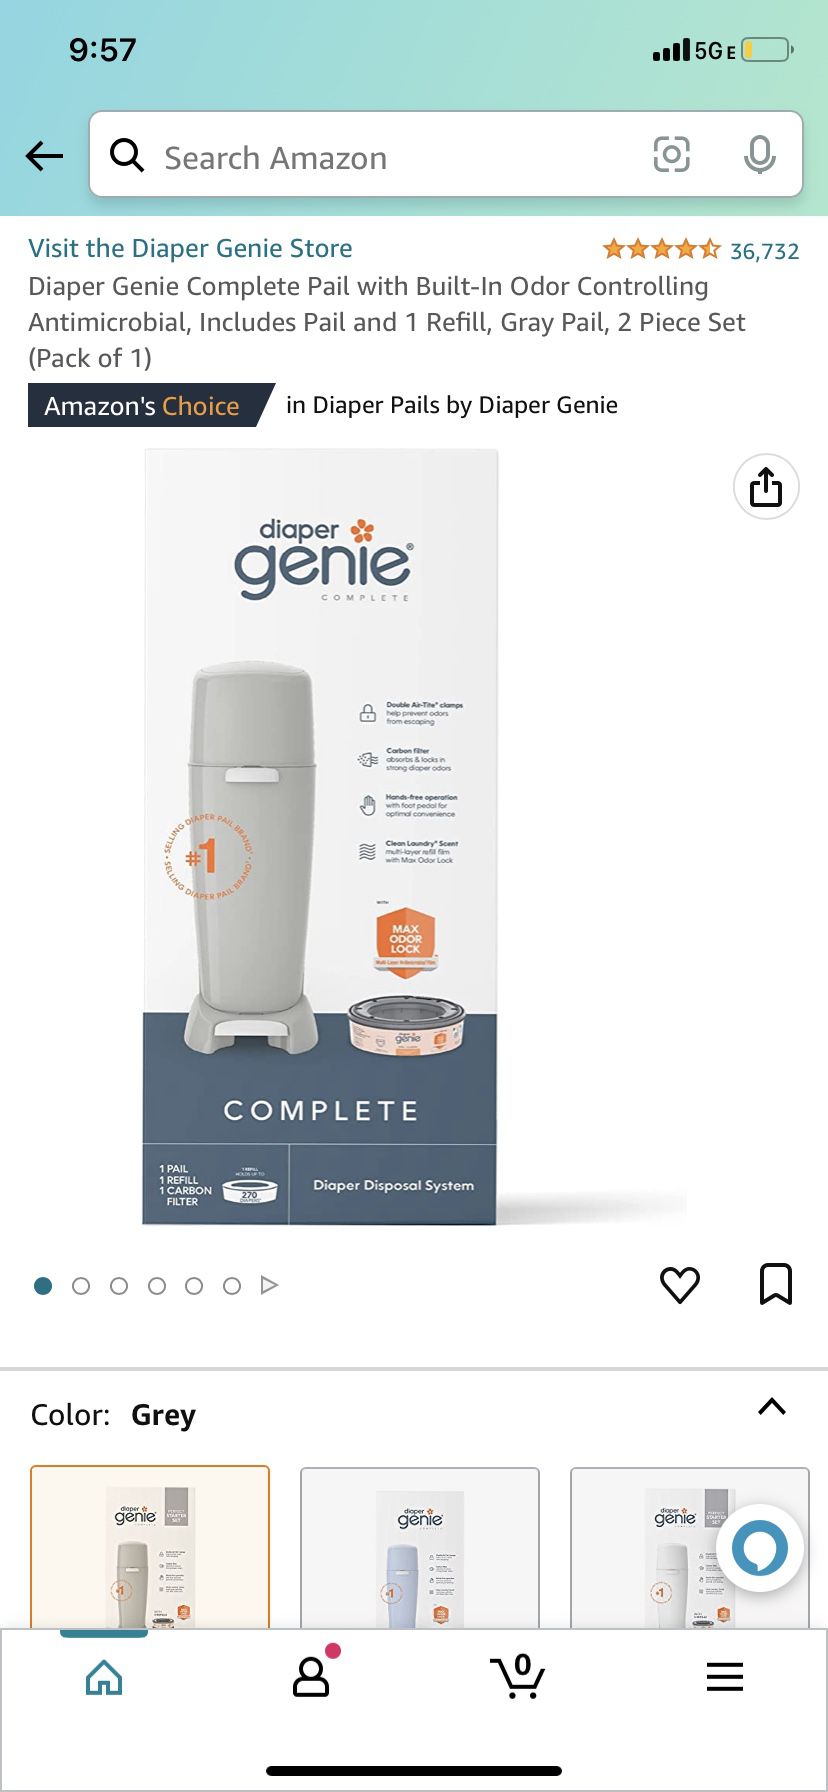 BRAND NEW UNOPENED!!! Diaper Genie Complete Pail with Built-In Odor Controlling Antimicrobial, Includes Pail and 1 Refill, Gray Pail, 2 Piece Set (Pac